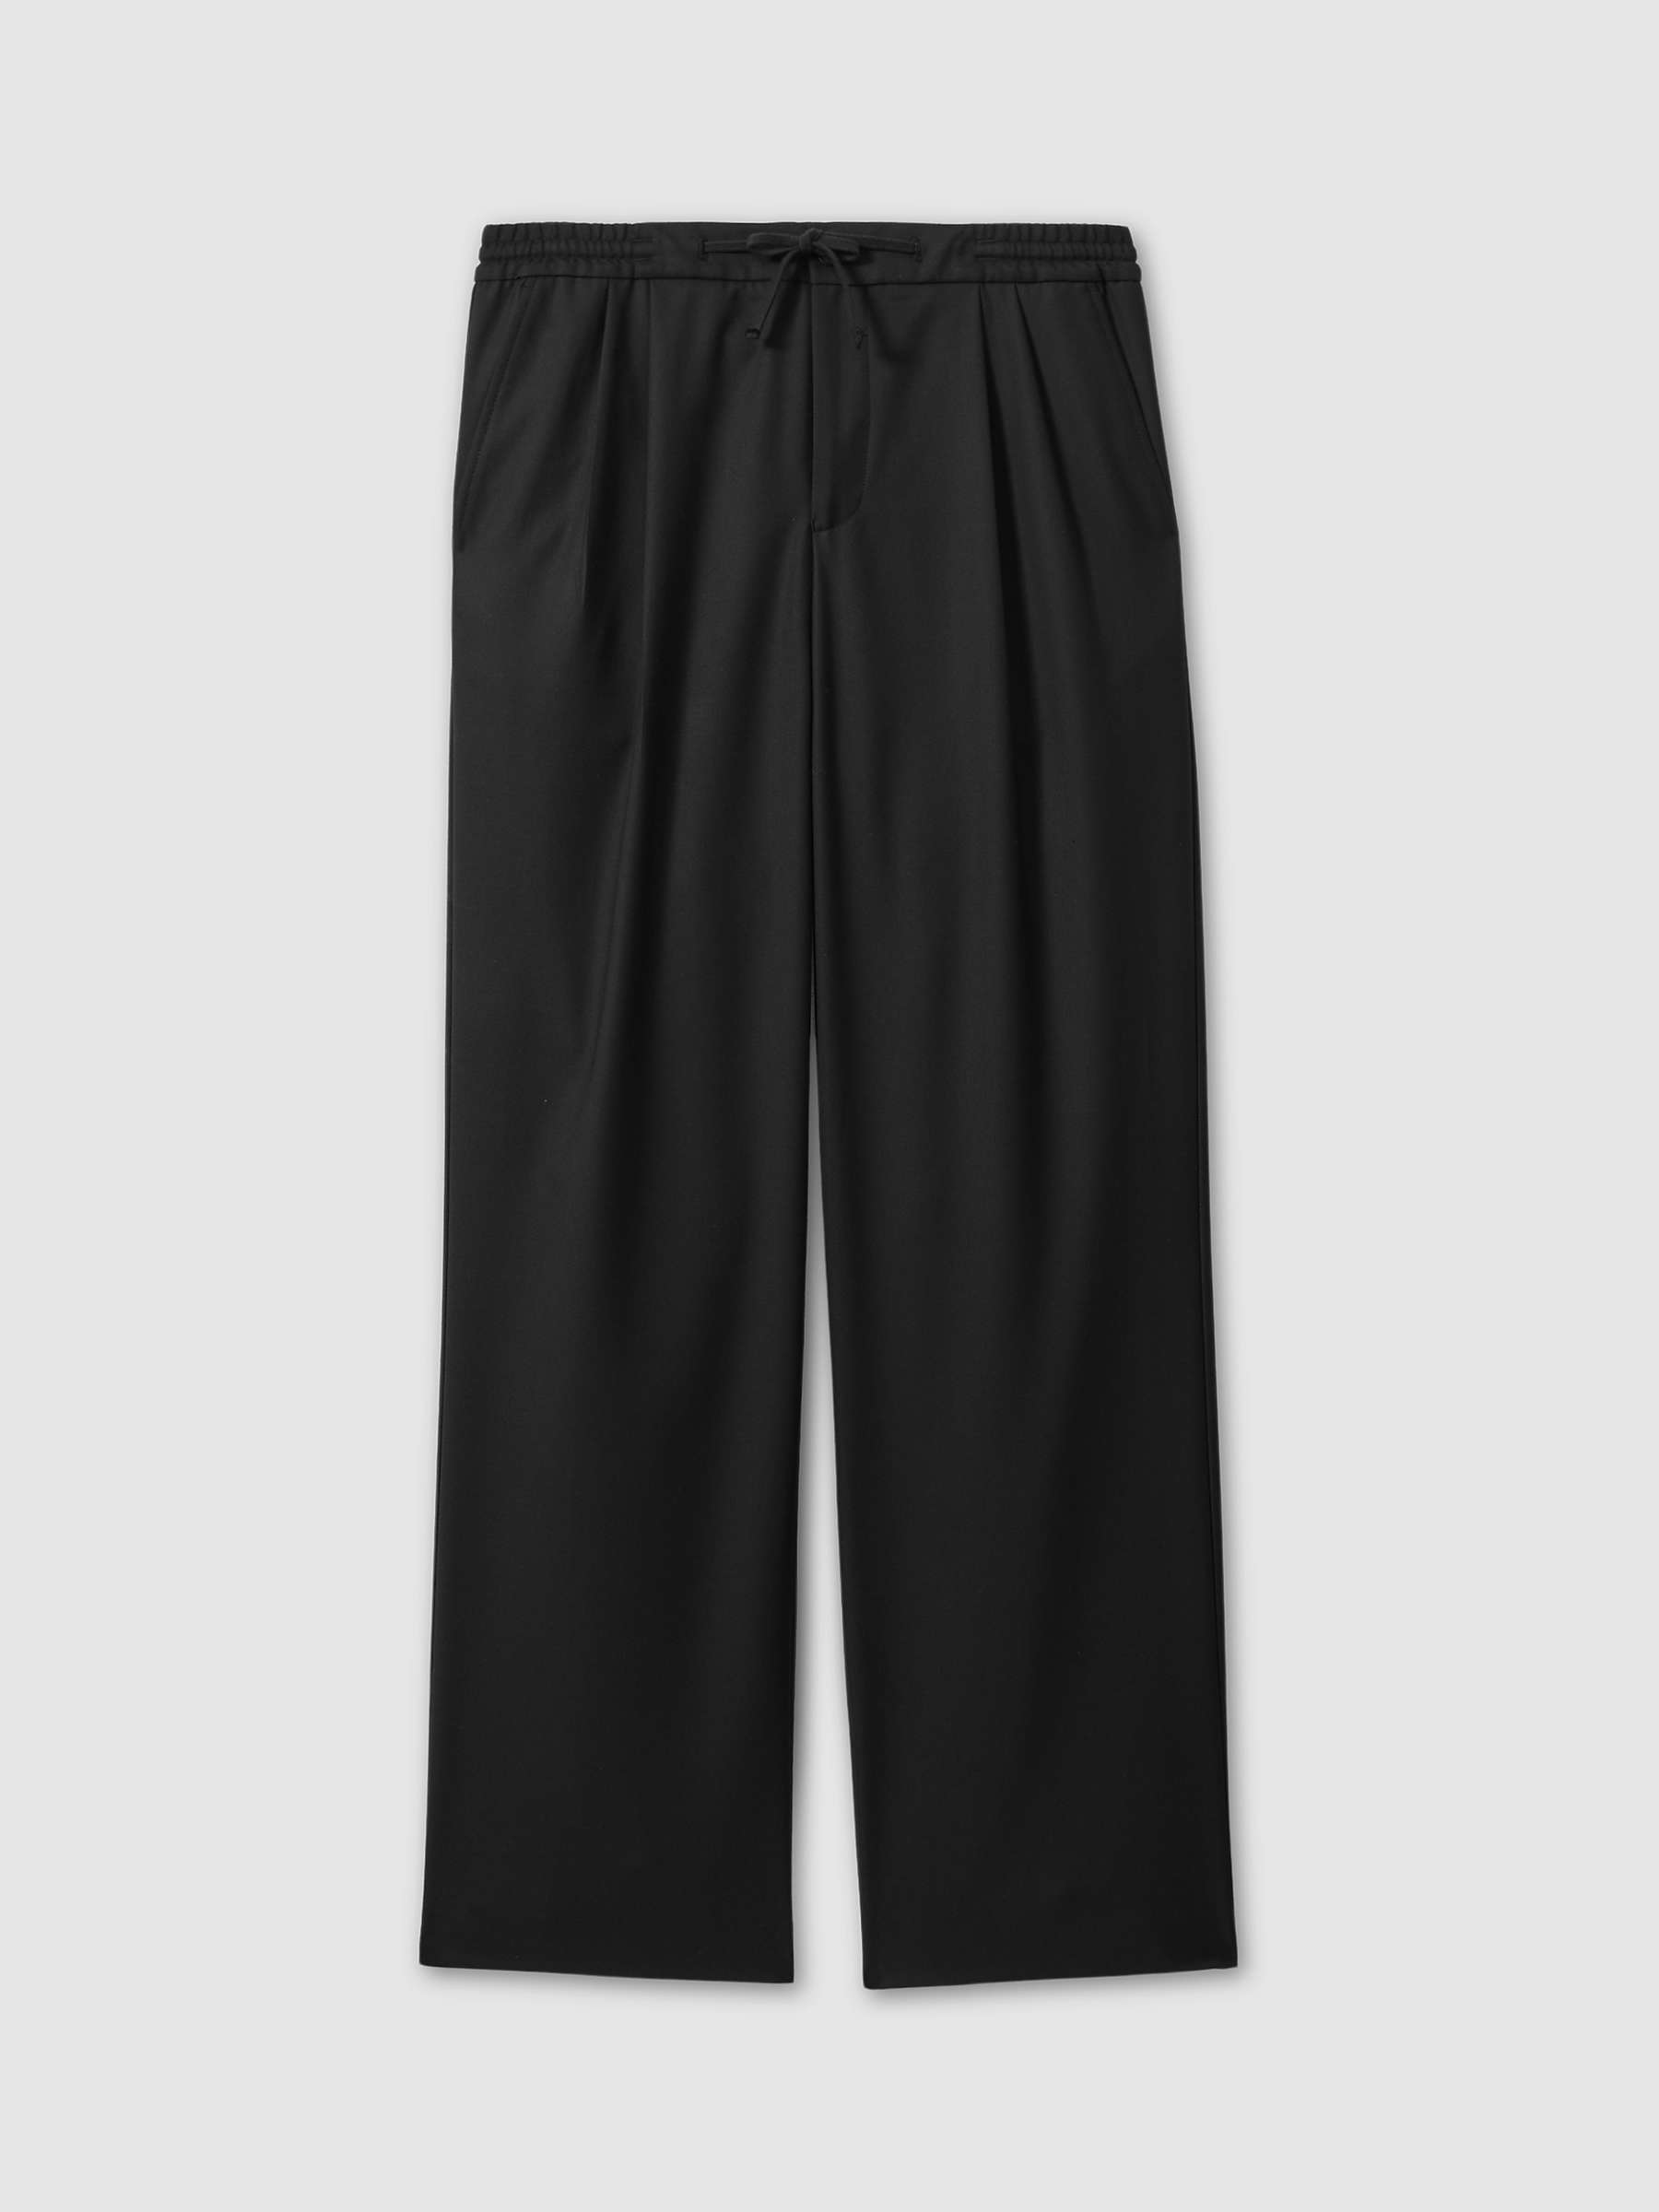 Buy Reiss Arden Relaxed Twill Drawstring Trousers Online at johnlewis.com